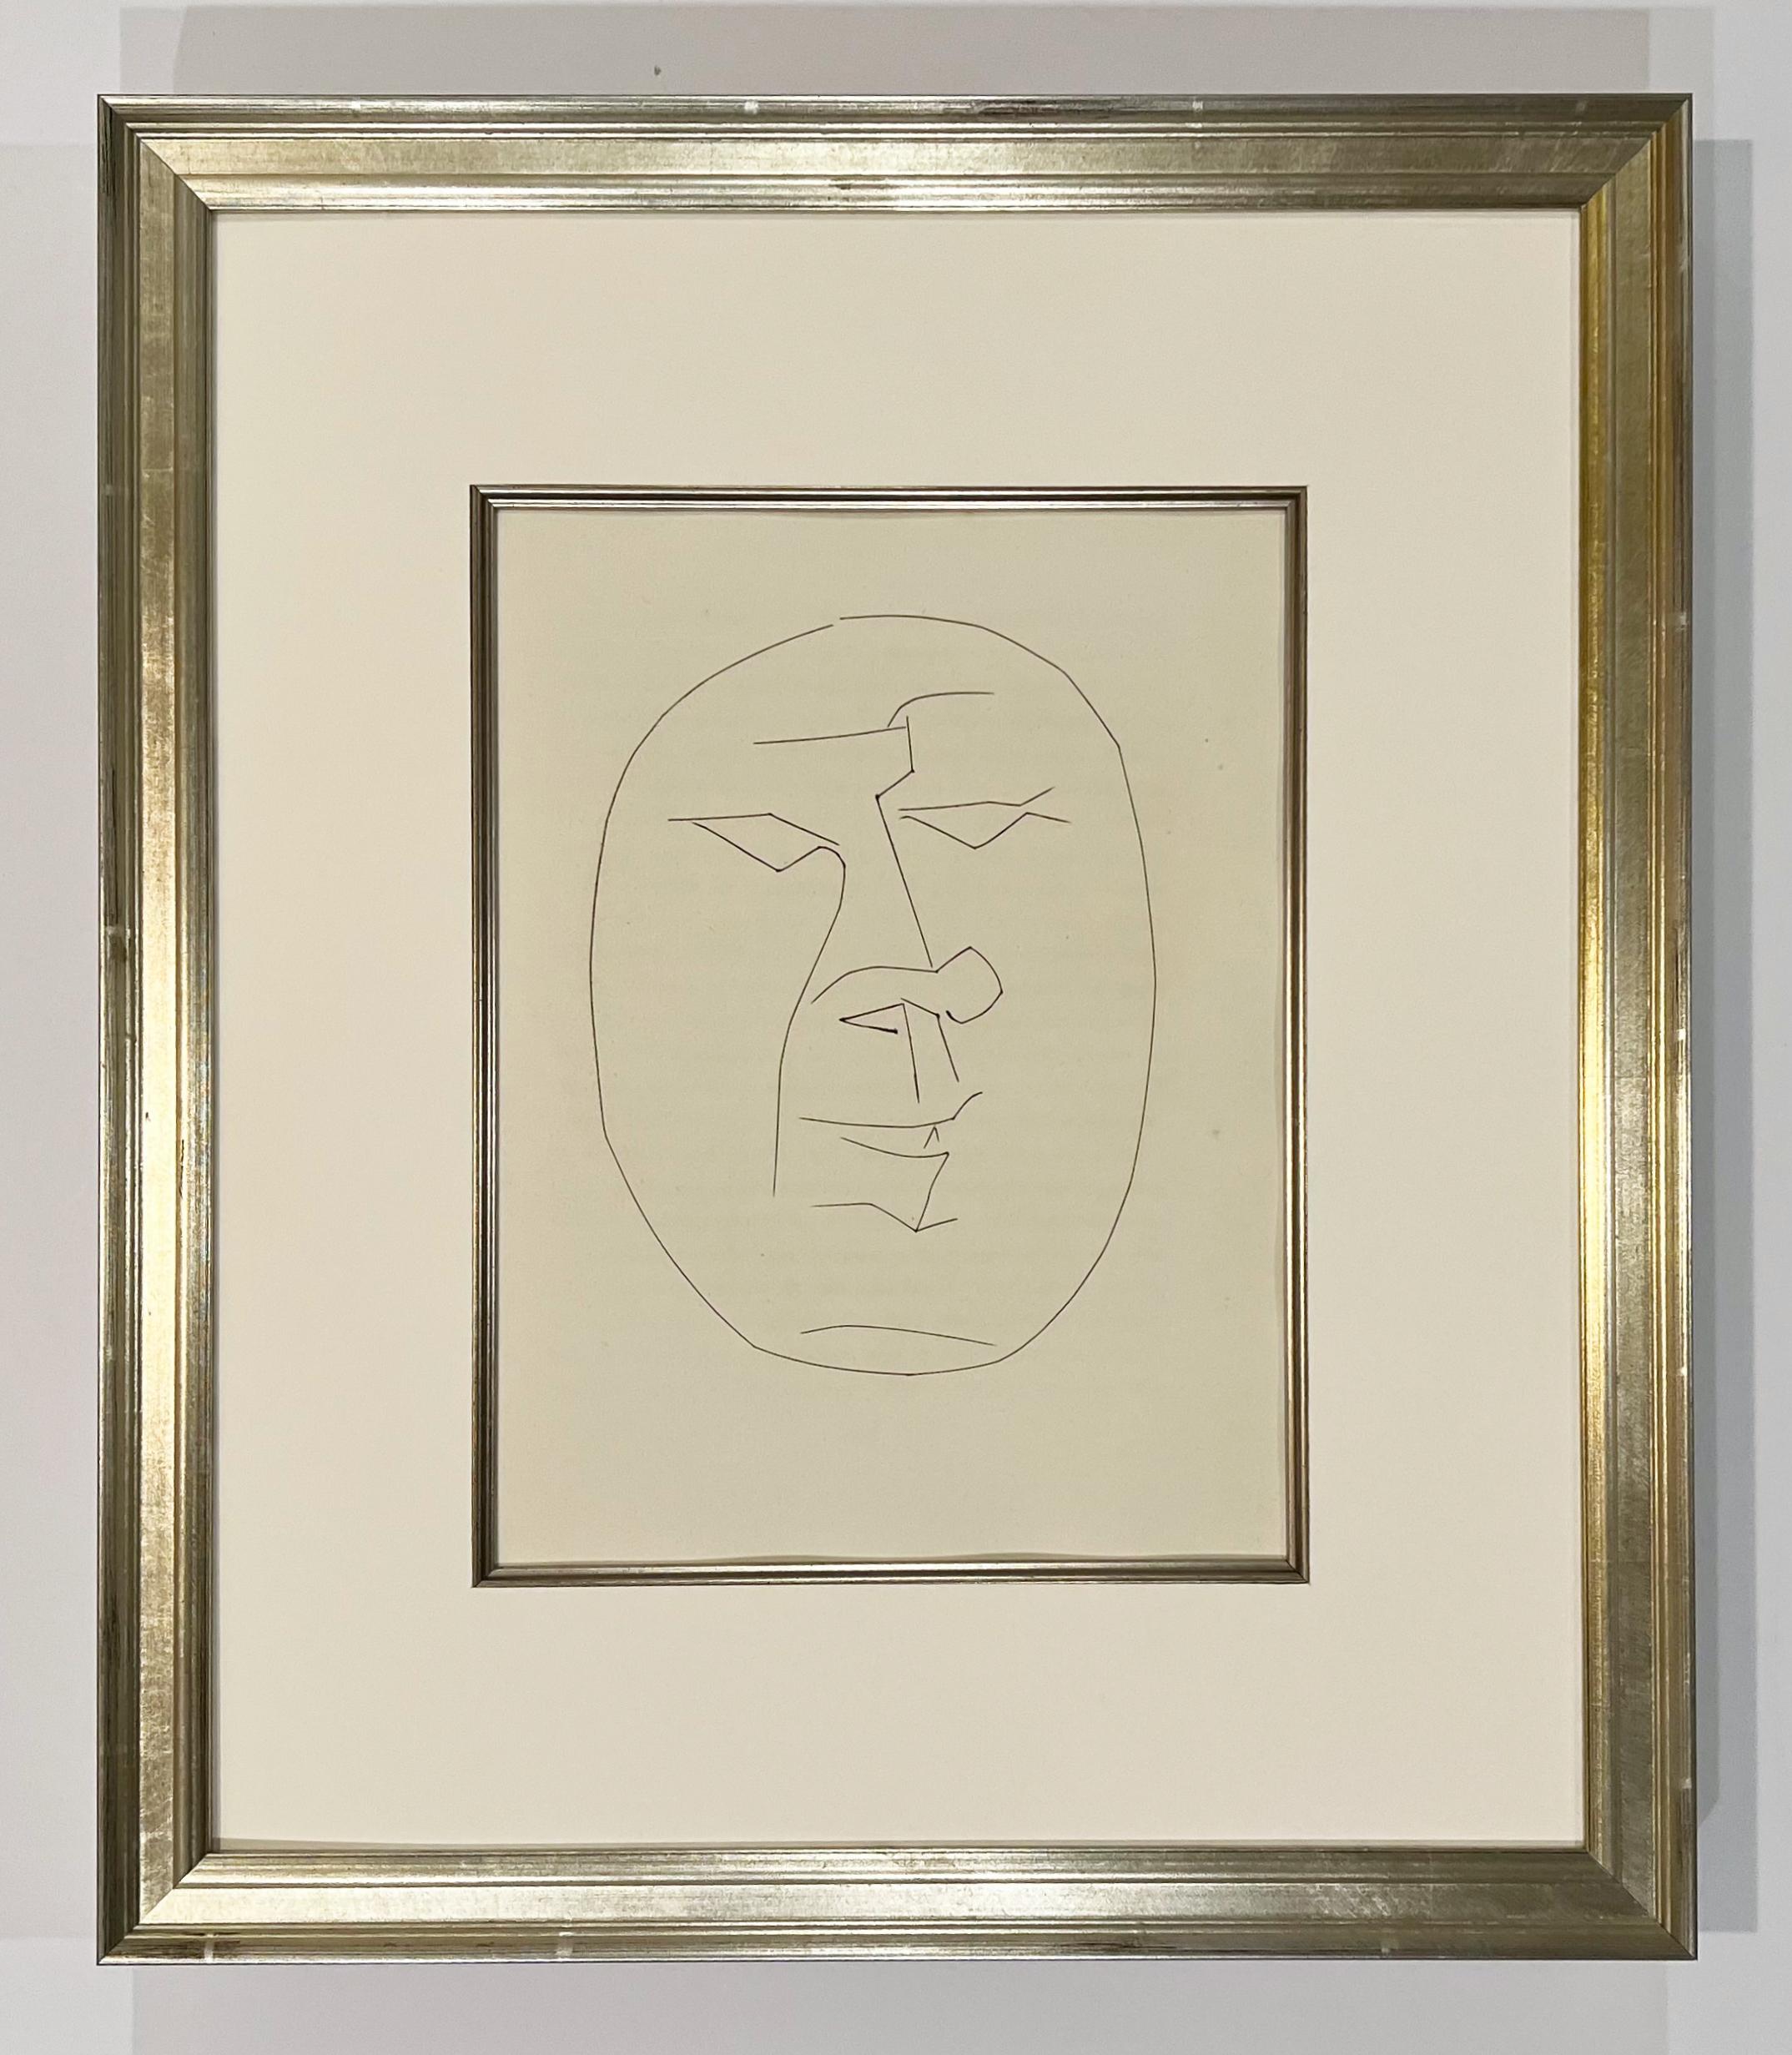 Oval Head of a Man Looking Left (Plate XXIV), from Carmen - Print by Pablo Picasso